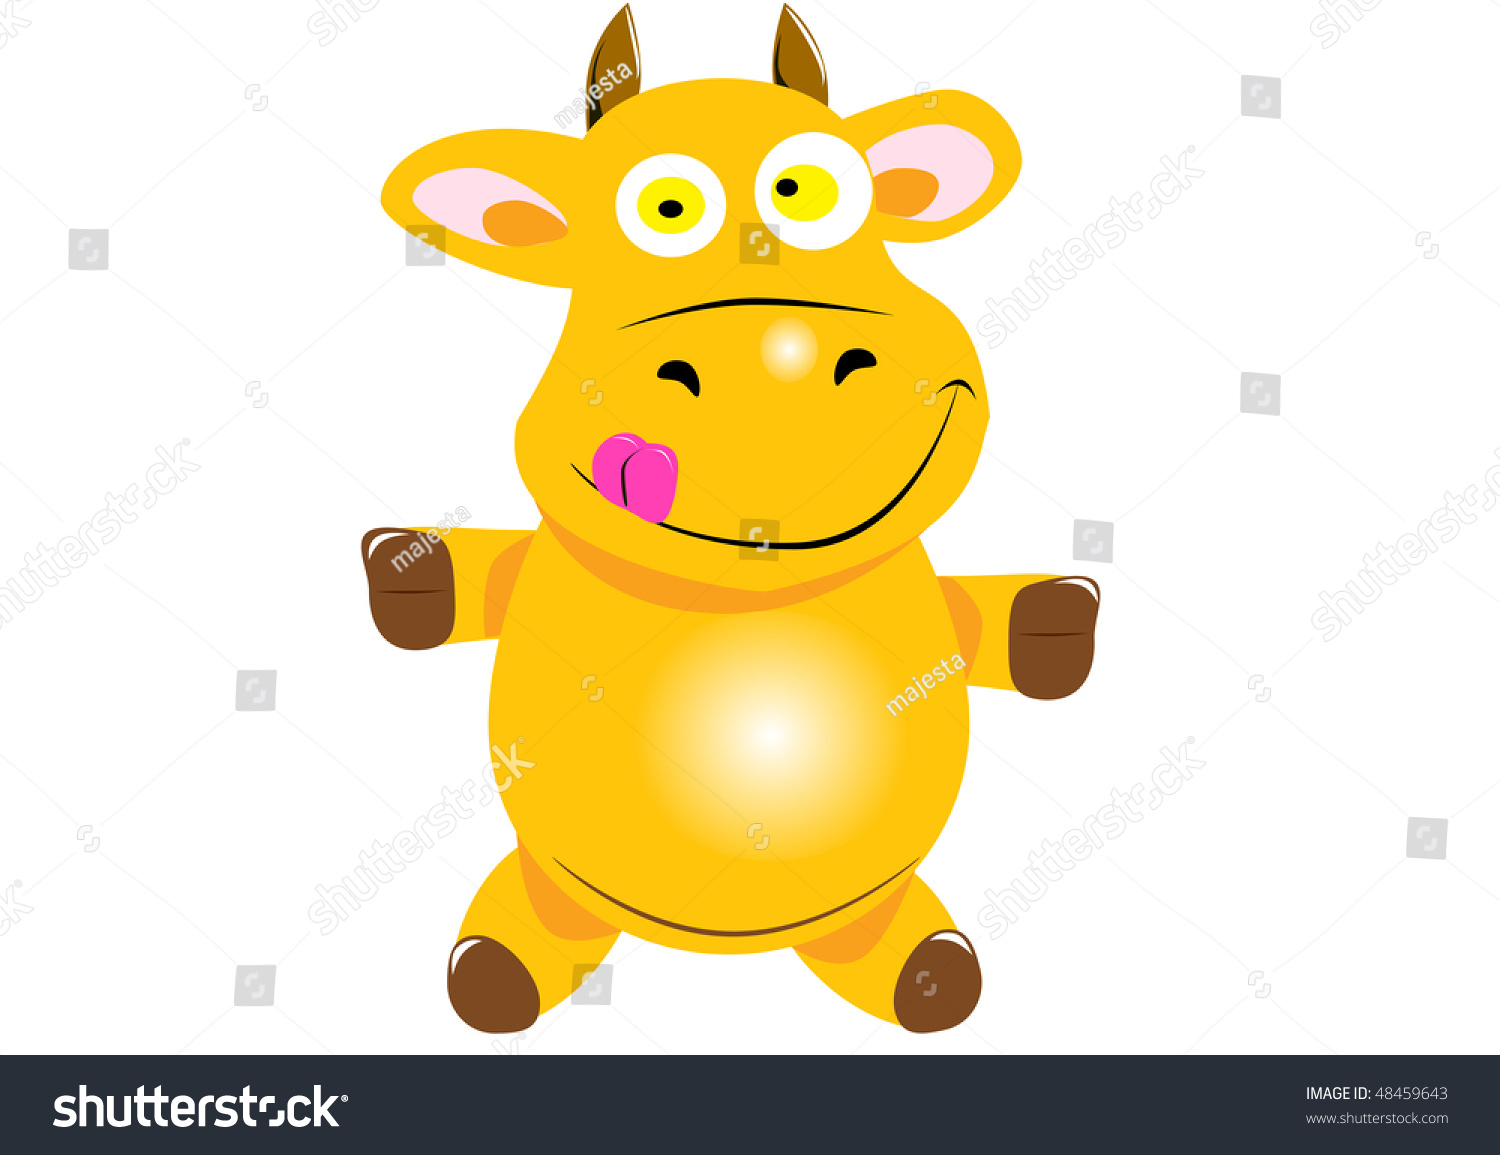 yellow cow clipart - photo #13